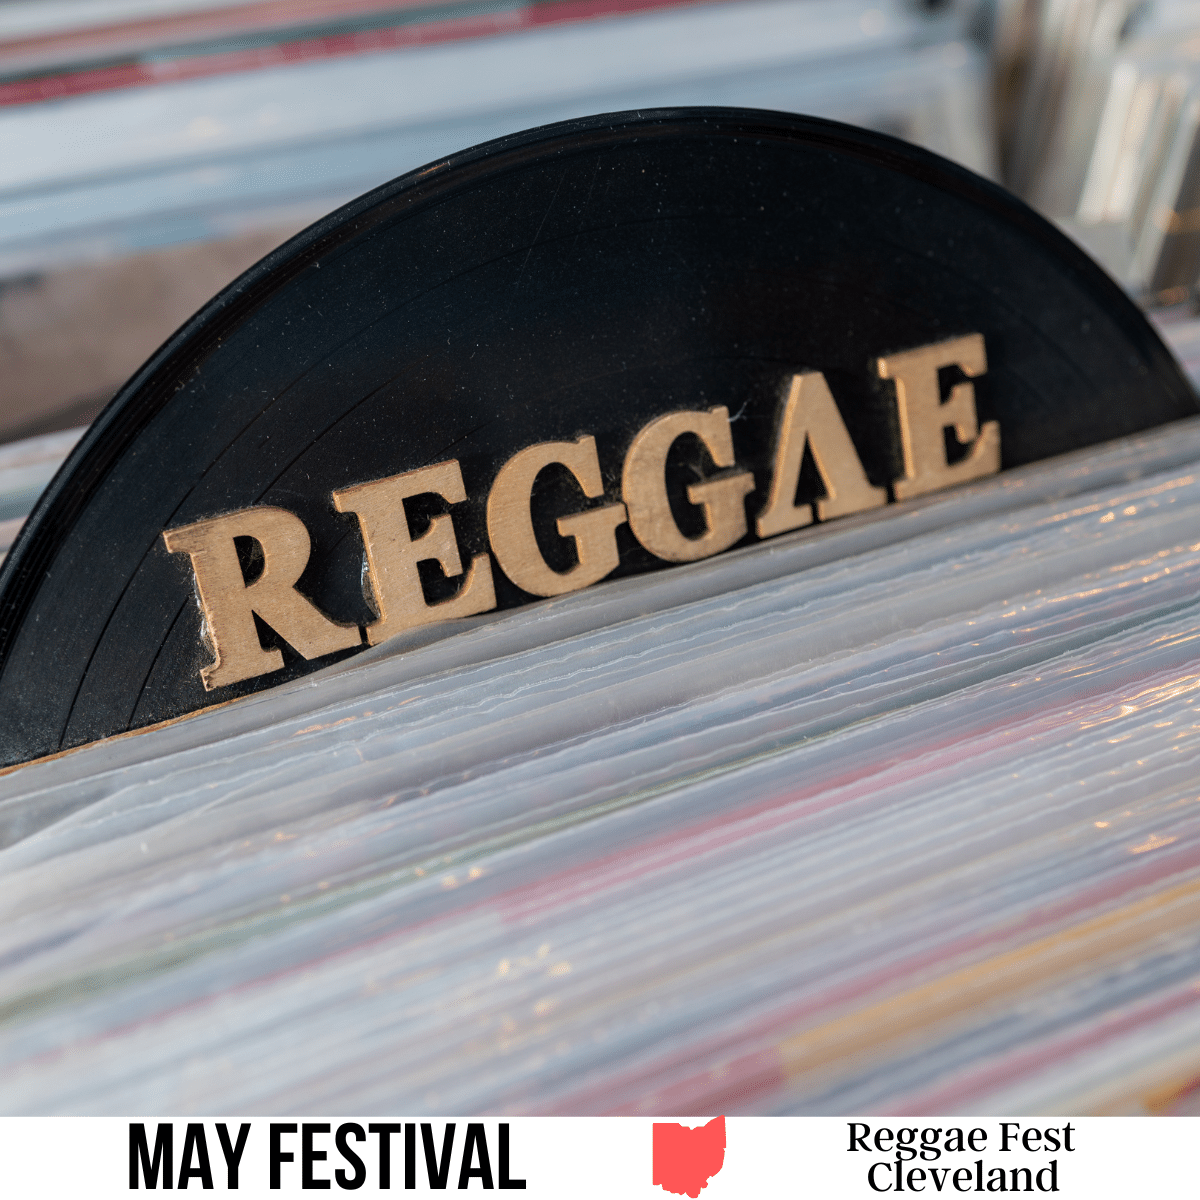 A square image of a photo of an organizer sign that has text Reggae in gold letters on a black background. A white strip across the bottom has text May Festival Reggae Fest Cleveland.